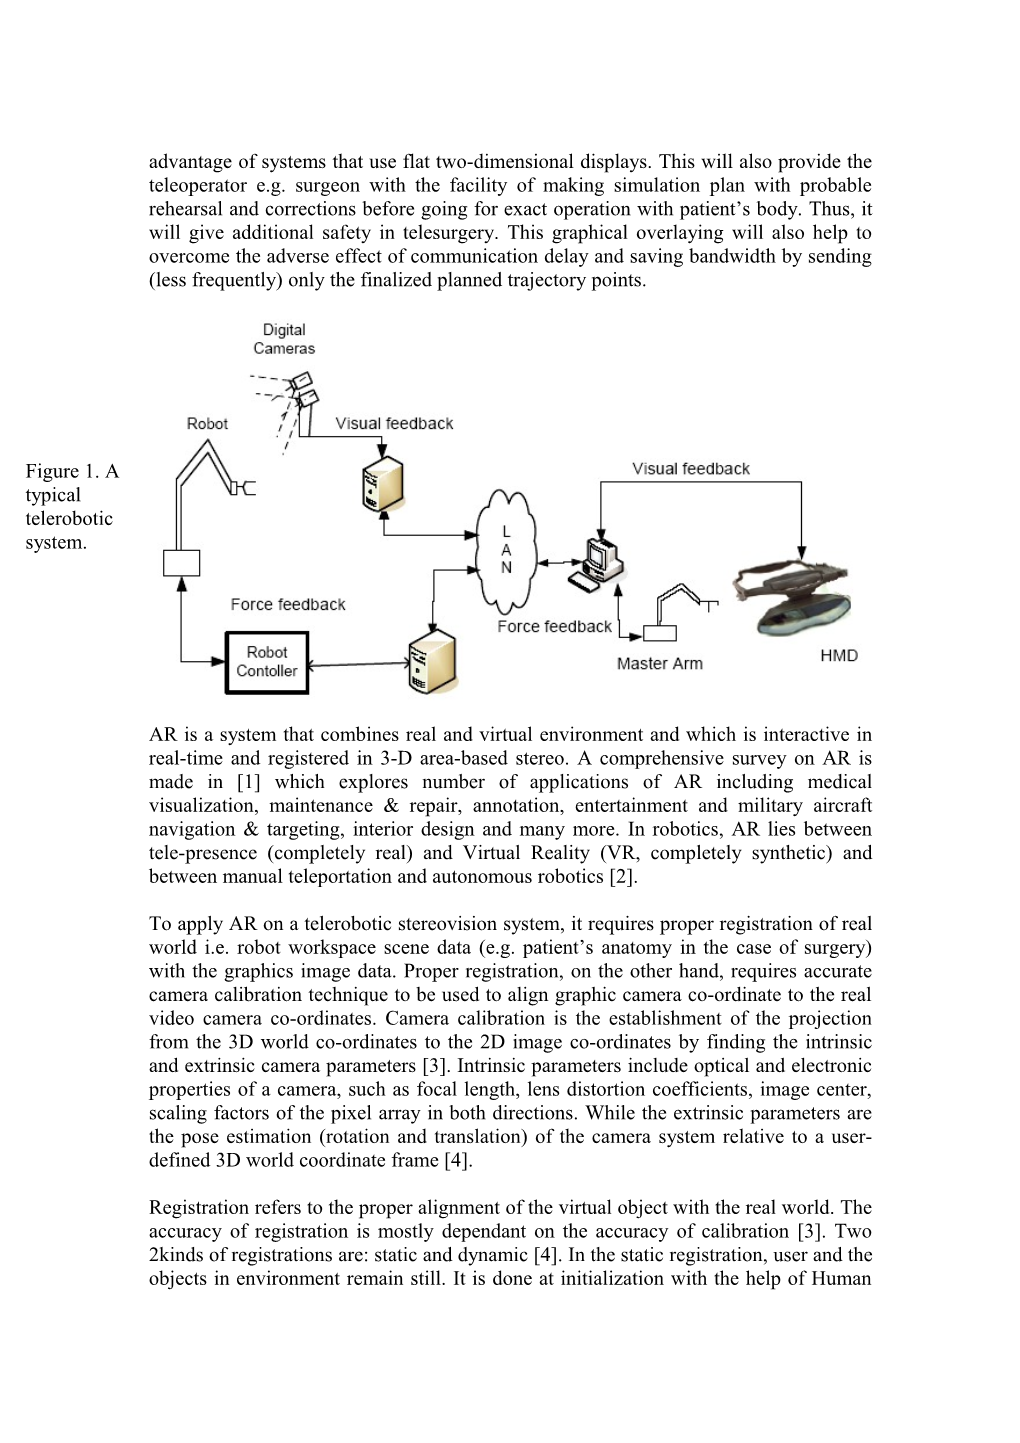 A Hierarchical Design Scheme for Application of Augmented Reality in a Telerobotic Stereo-Vision